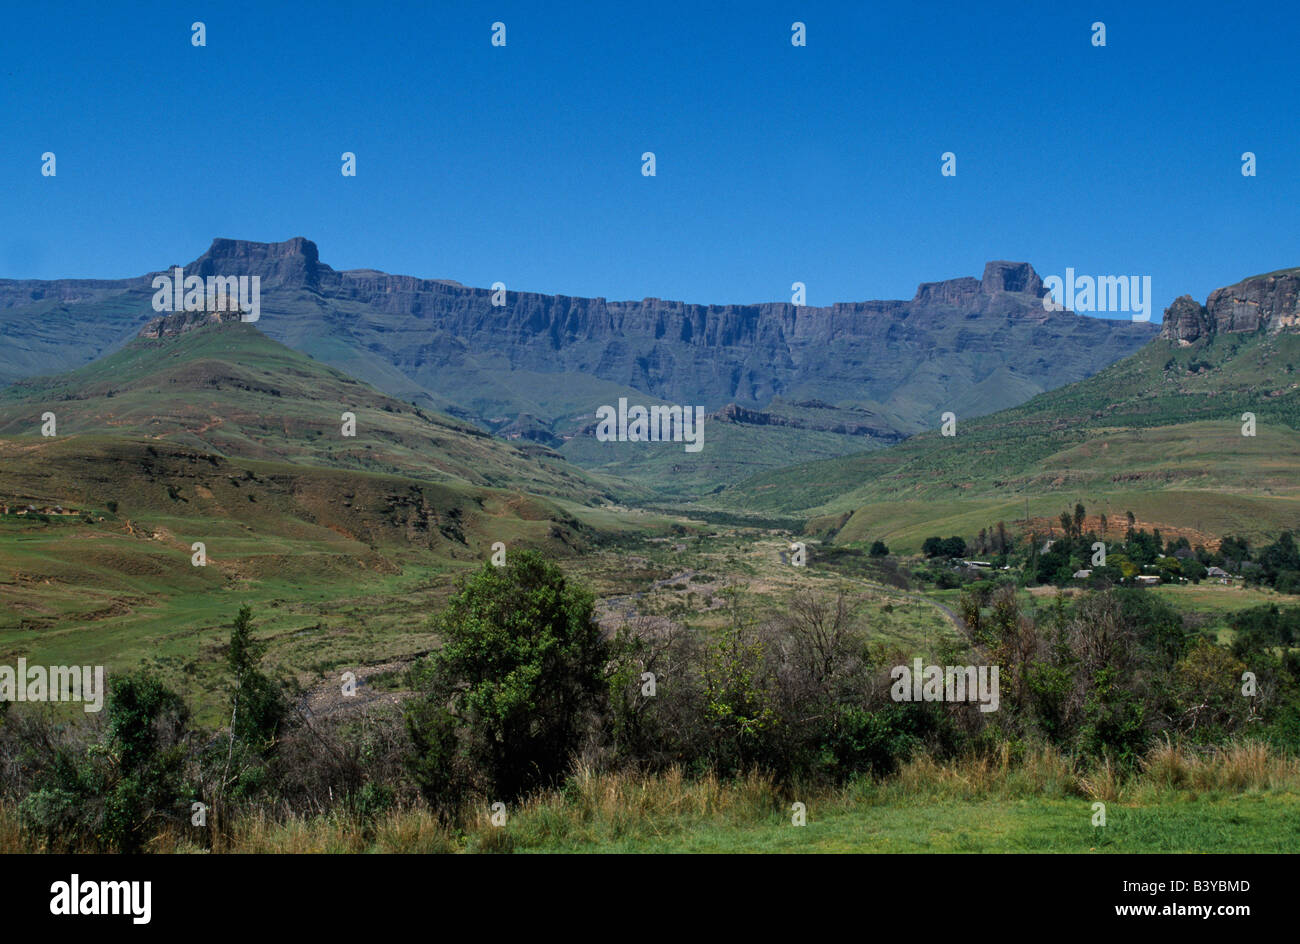 South Africa Mountains